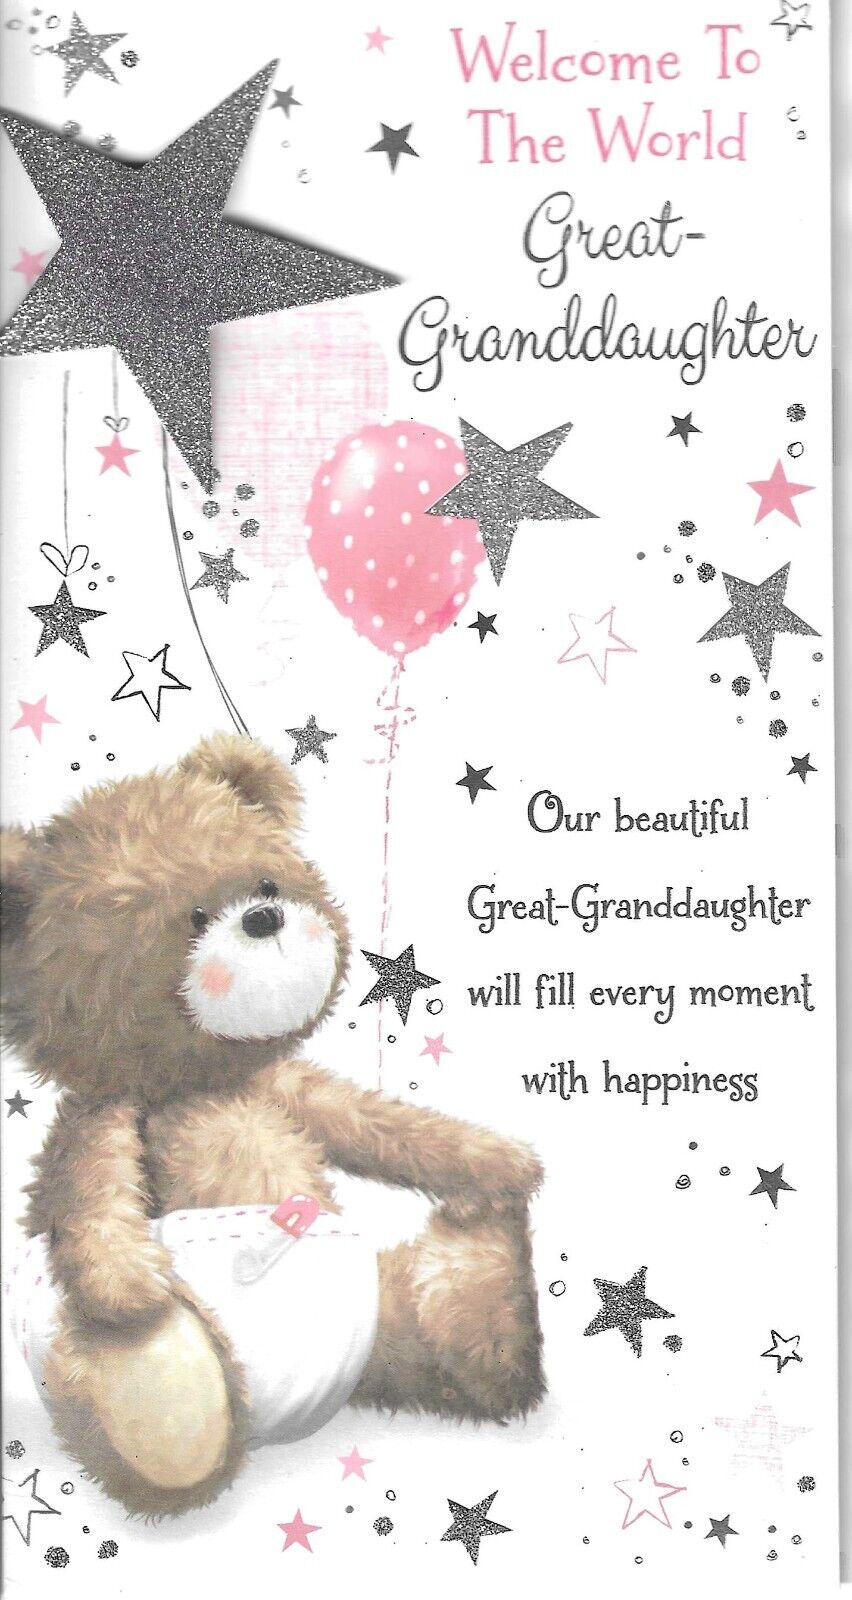 Prelude ''Welcome To The World Great Granddaughter'' Card RRP 2.99 CLEARANCE XL 1.99